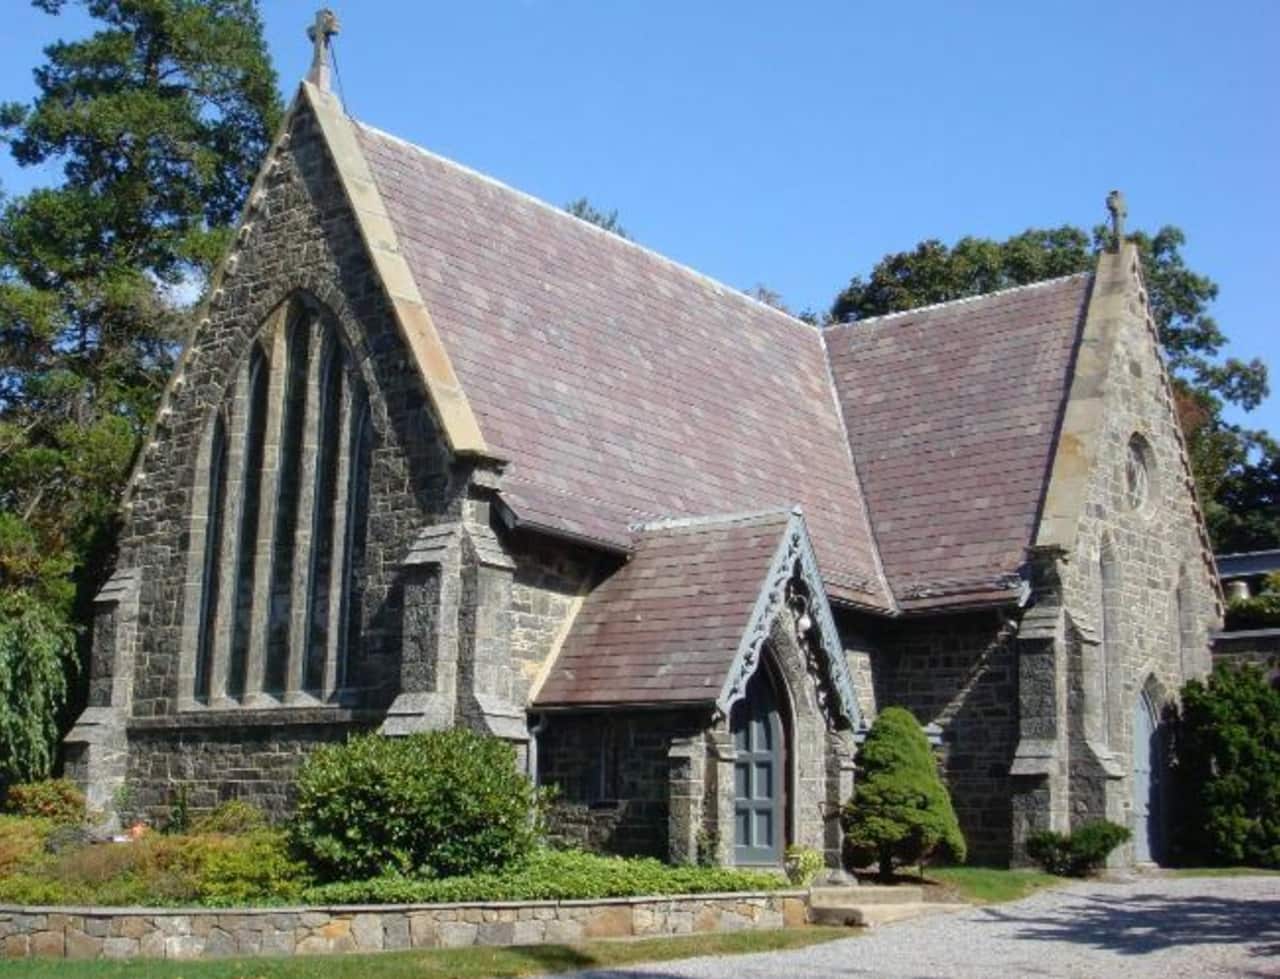 St. Mary's Episcopal Church will celebrate its 175th anniversary on Sunday, Jan. 12, at the Briarcliff Manor Public Library.